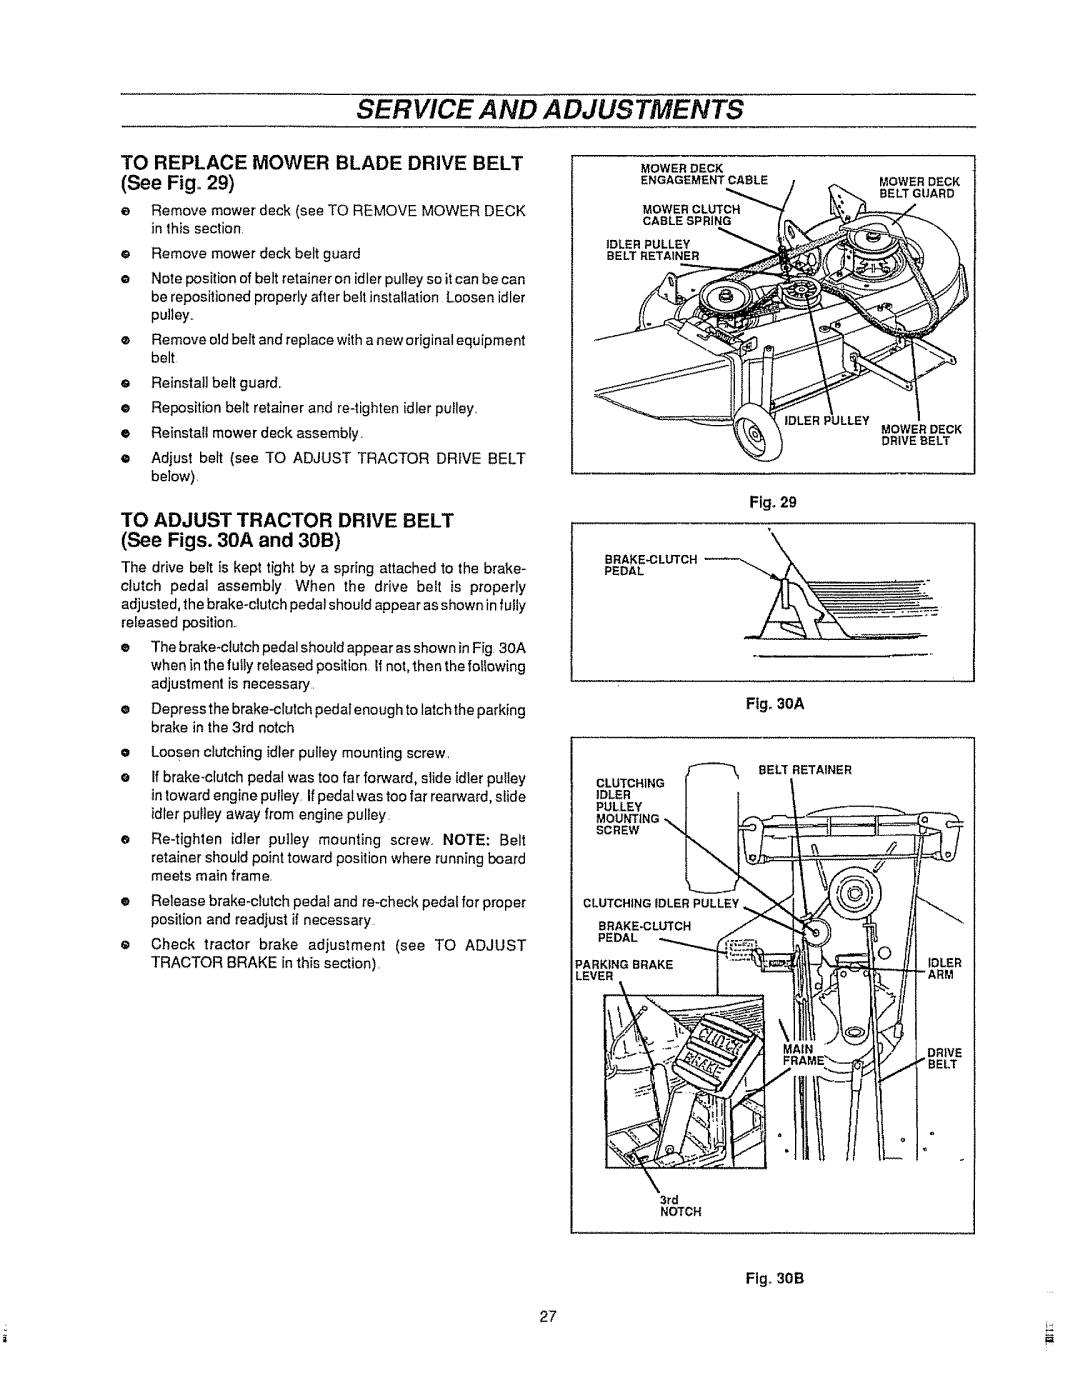 Sears 536.25587 owner manual Service And Adjustments, See Fig+, See Figs. 30A and 30B, To Replace Mower Blade Drive Belt 